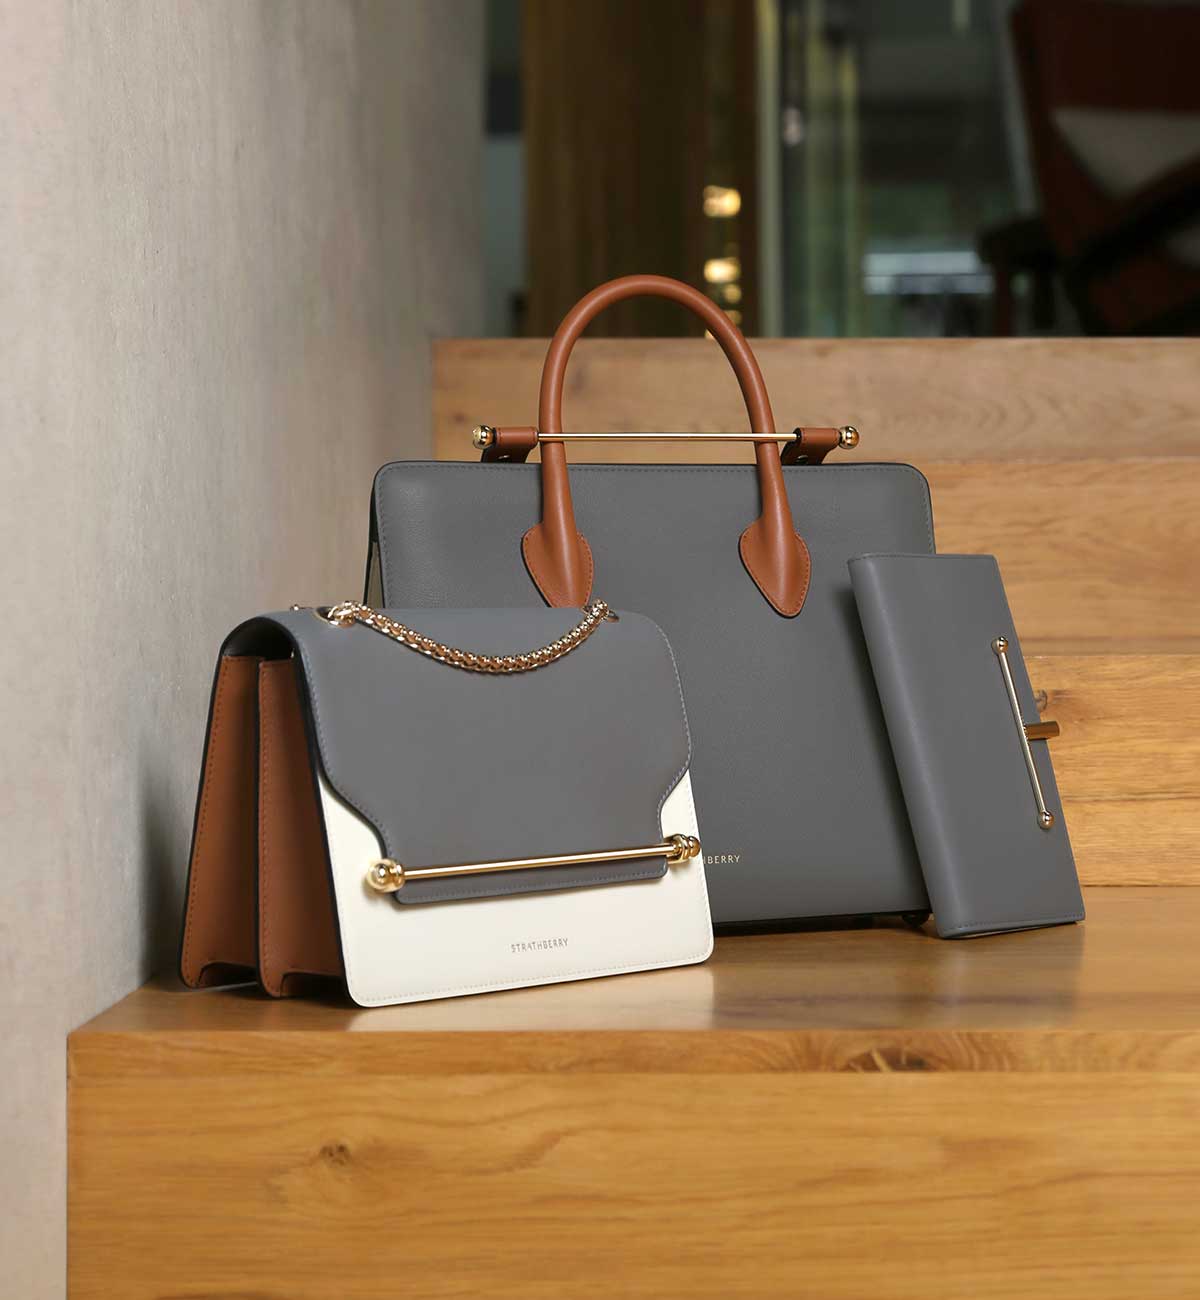 STRATHBERRY Tricolor Leather Midi Tote Bag